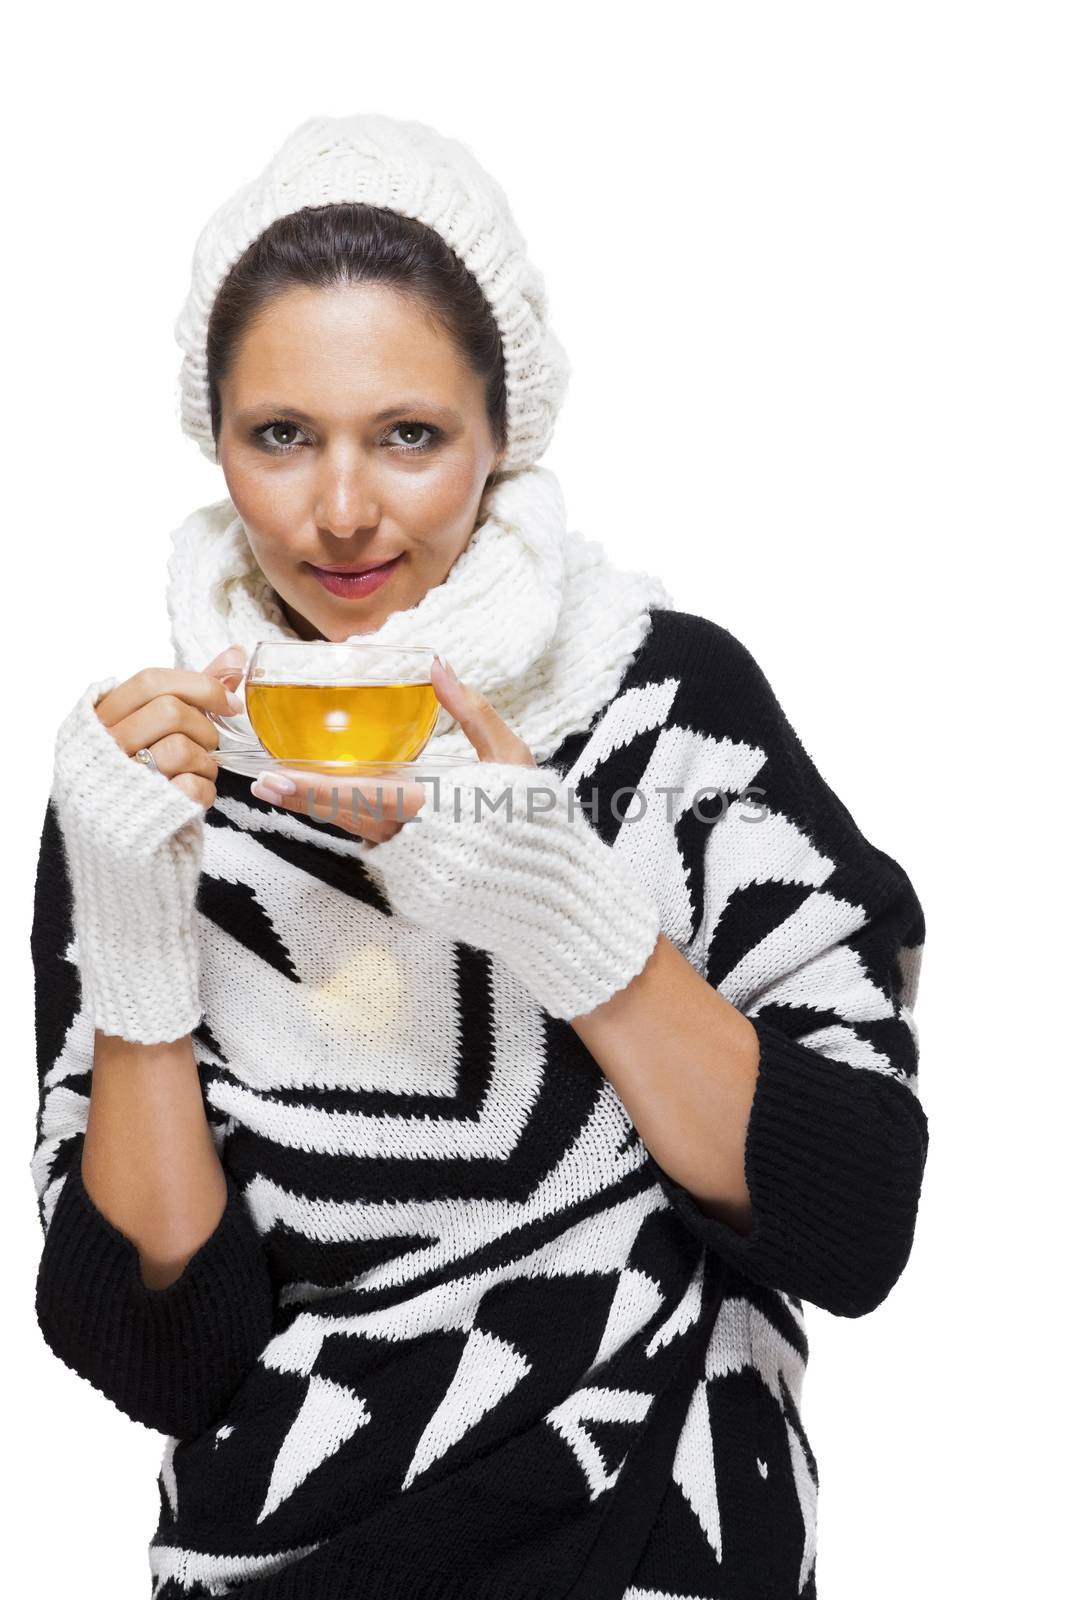 Elegant woman in a stylish black and white winter outfit with matching white mitts, scarf and knitted hat drinking a cup of hot tea, isolated on white